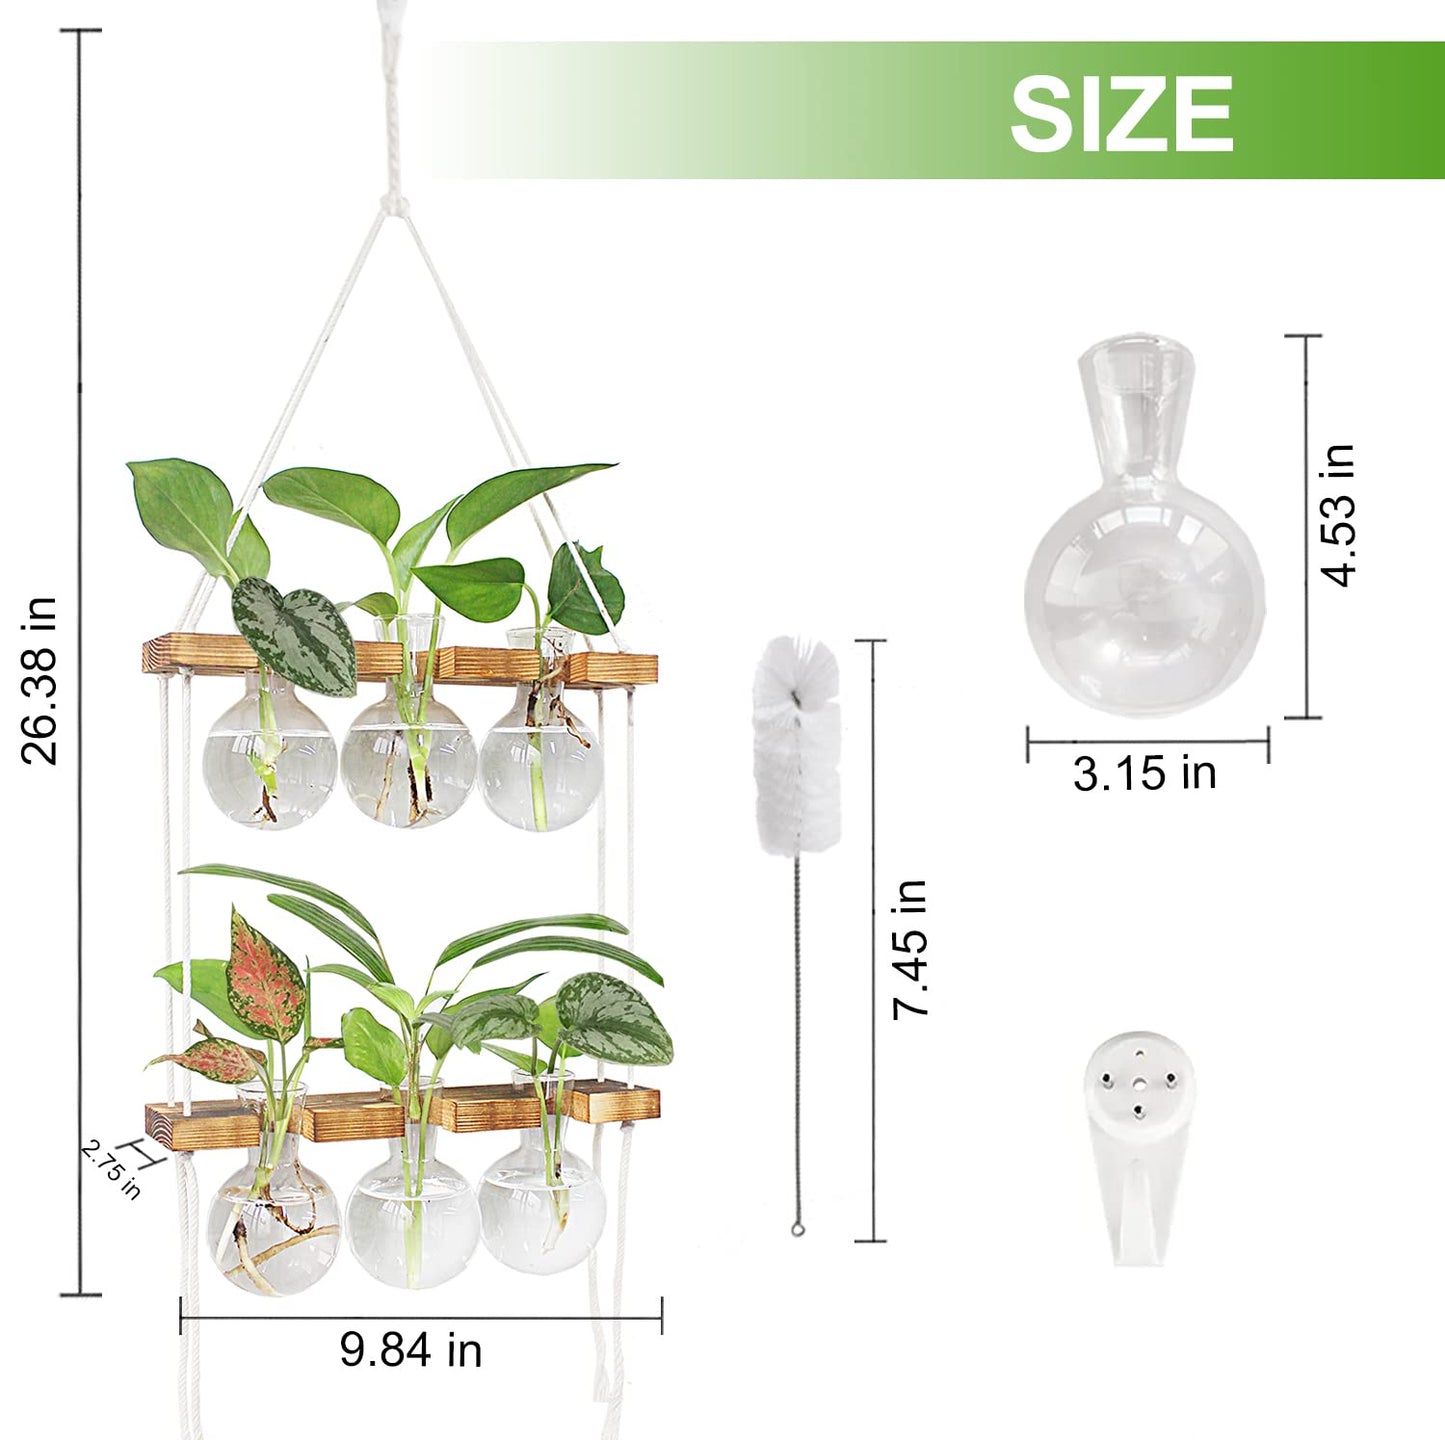 Renmxj Plant Propagation Station Wall Hanging, Plant Terrarium with 2 Tiered Wooden Stand for Hydroponics Plants, Unique Gardening for Women Mom Plant Lovers - 6 Bulb Glass Vases